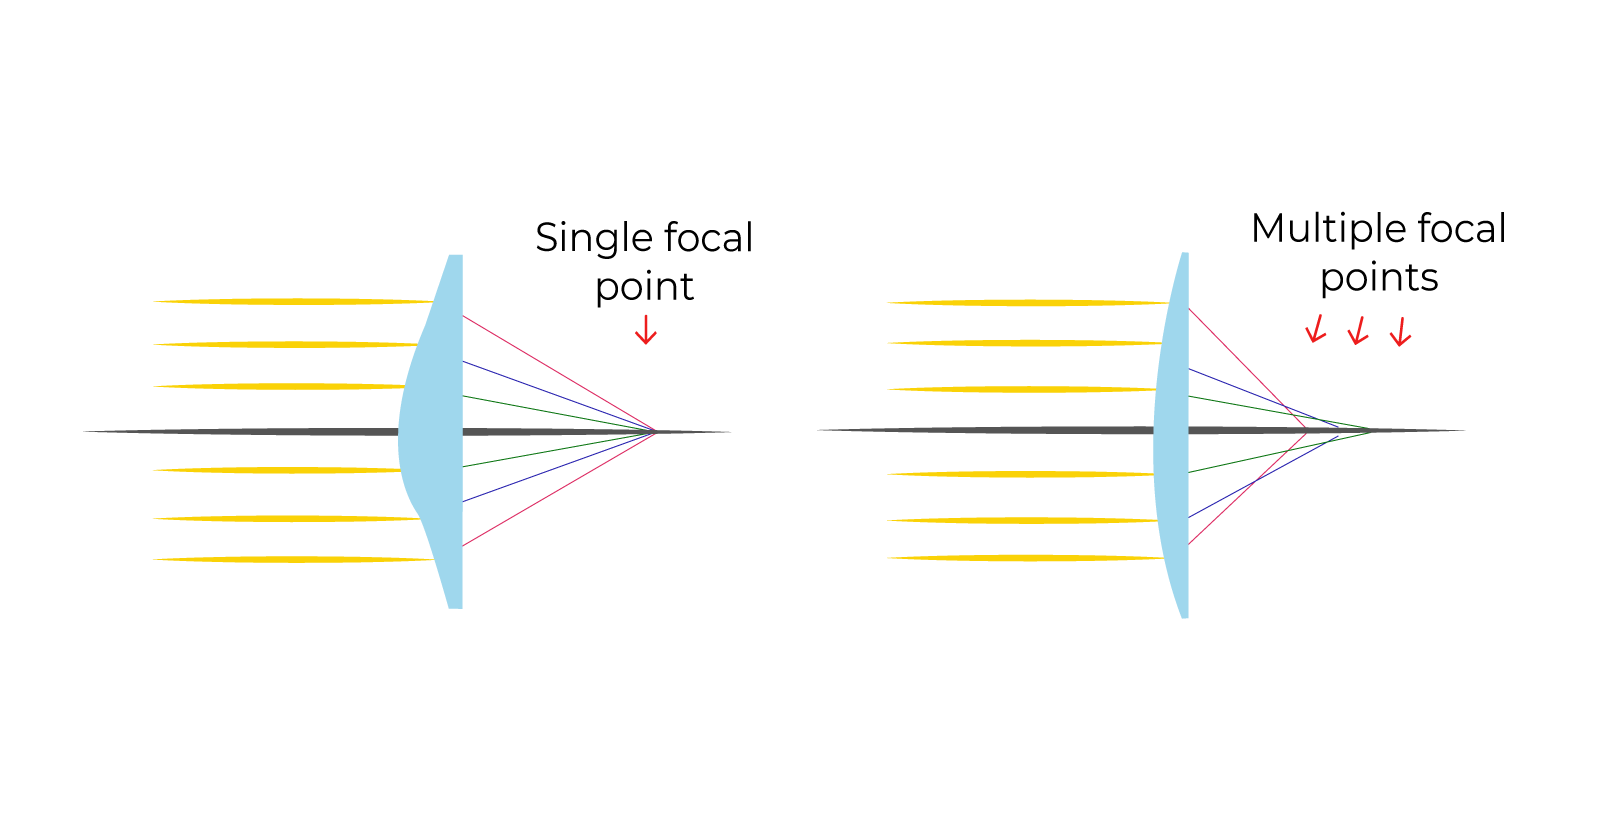 Light passing through a glasses lens to a single focal point vs multiple